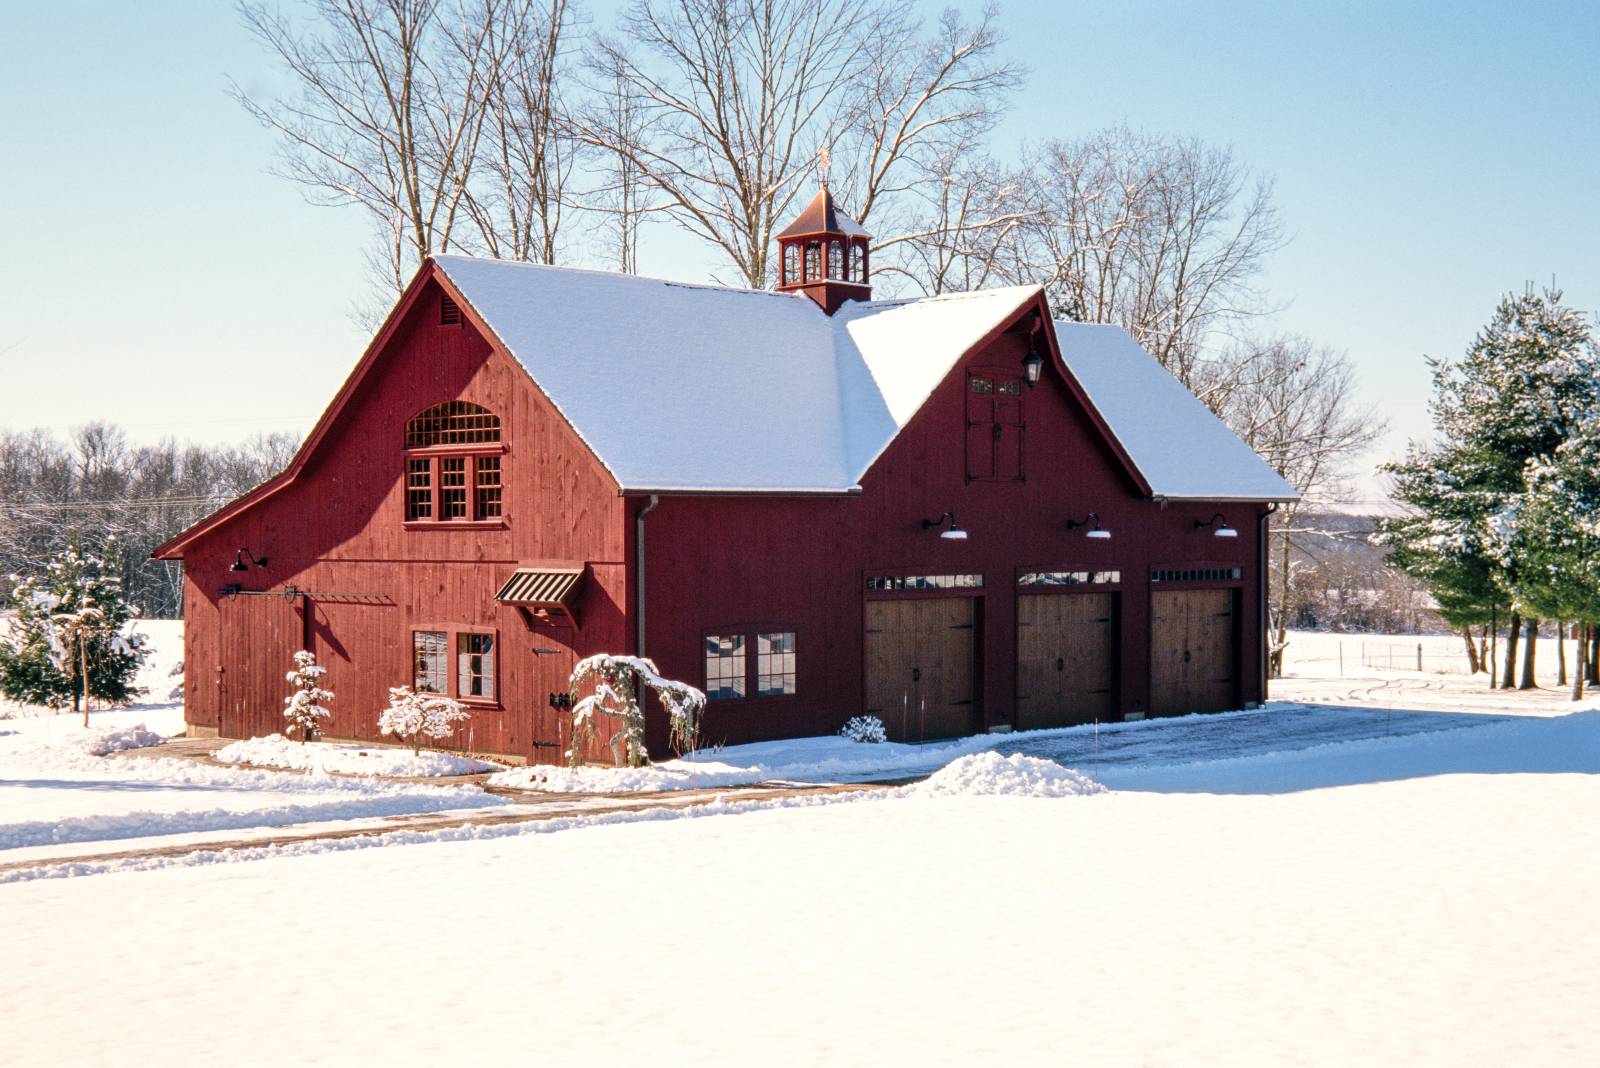 3-bay post & beam 2-story barn garage with reverse gable dormer & lean-to covered in snow